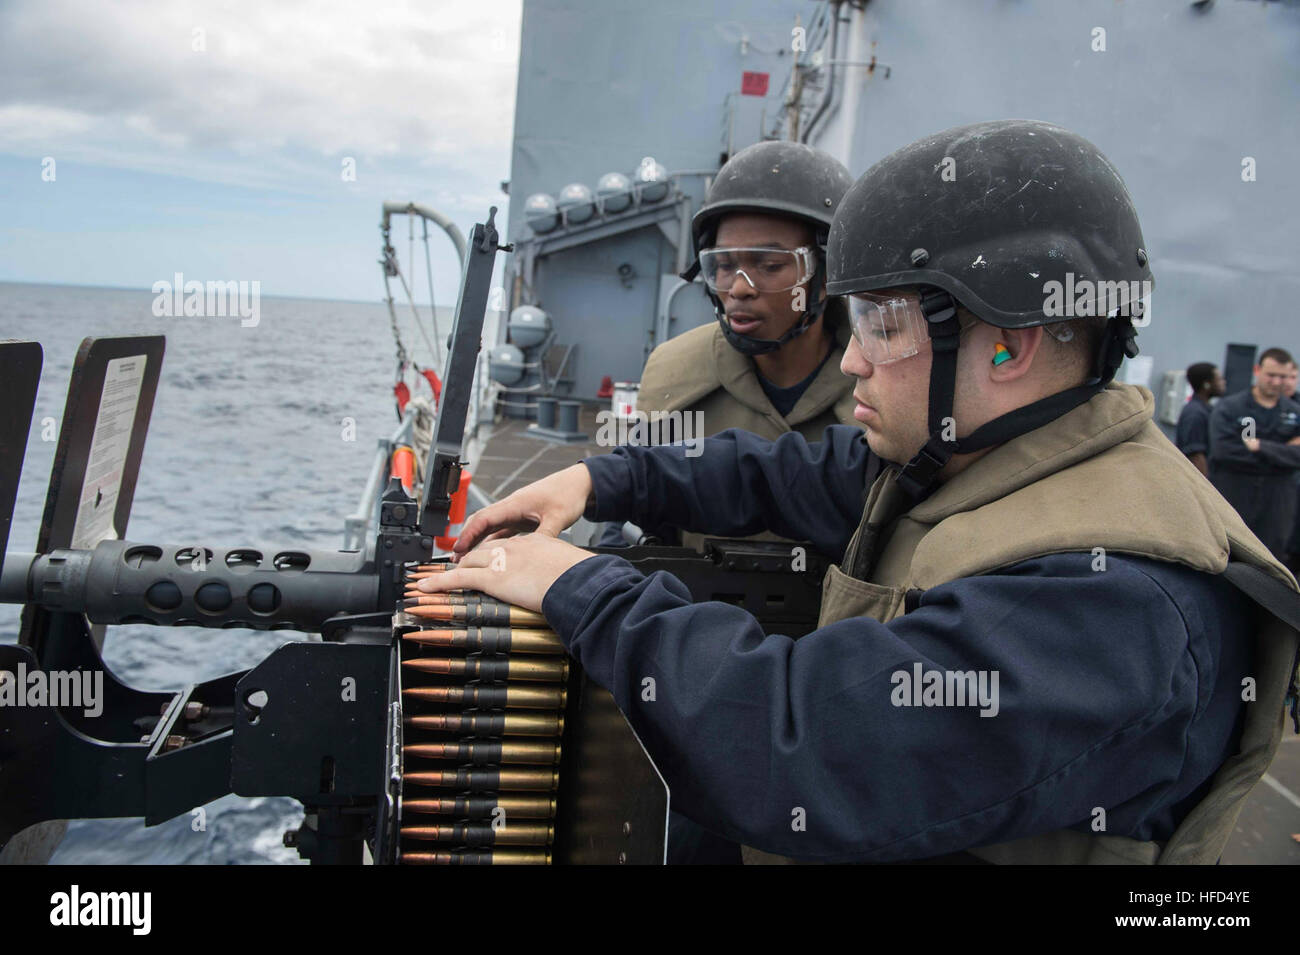 160225-N-RM689-254  SOUTH CHINA SEA (Feb. 25, 2016)- Culinary Specialist 2nd Class Edward Orsak, assigned to amphibious dock landing ship USS Ashland (LSD 48), loads the .50-caliber machine gun while Gunner’s Mate Seaman Robert White, one of Ashland’s firearms instructors, performs safety officer duties during a small craft attack team (SCAT) live fire drill. Ashland is assigned to the Bonhomme Richard Amphibious Ready Group (BHRARG) and is conducting a routine patrol in the 7th Fleet area of responsibility. (U.S. Navy photo by Mass Communication Specialist Seaman Kelsey L. Adams/Released) Sma Stock Photo